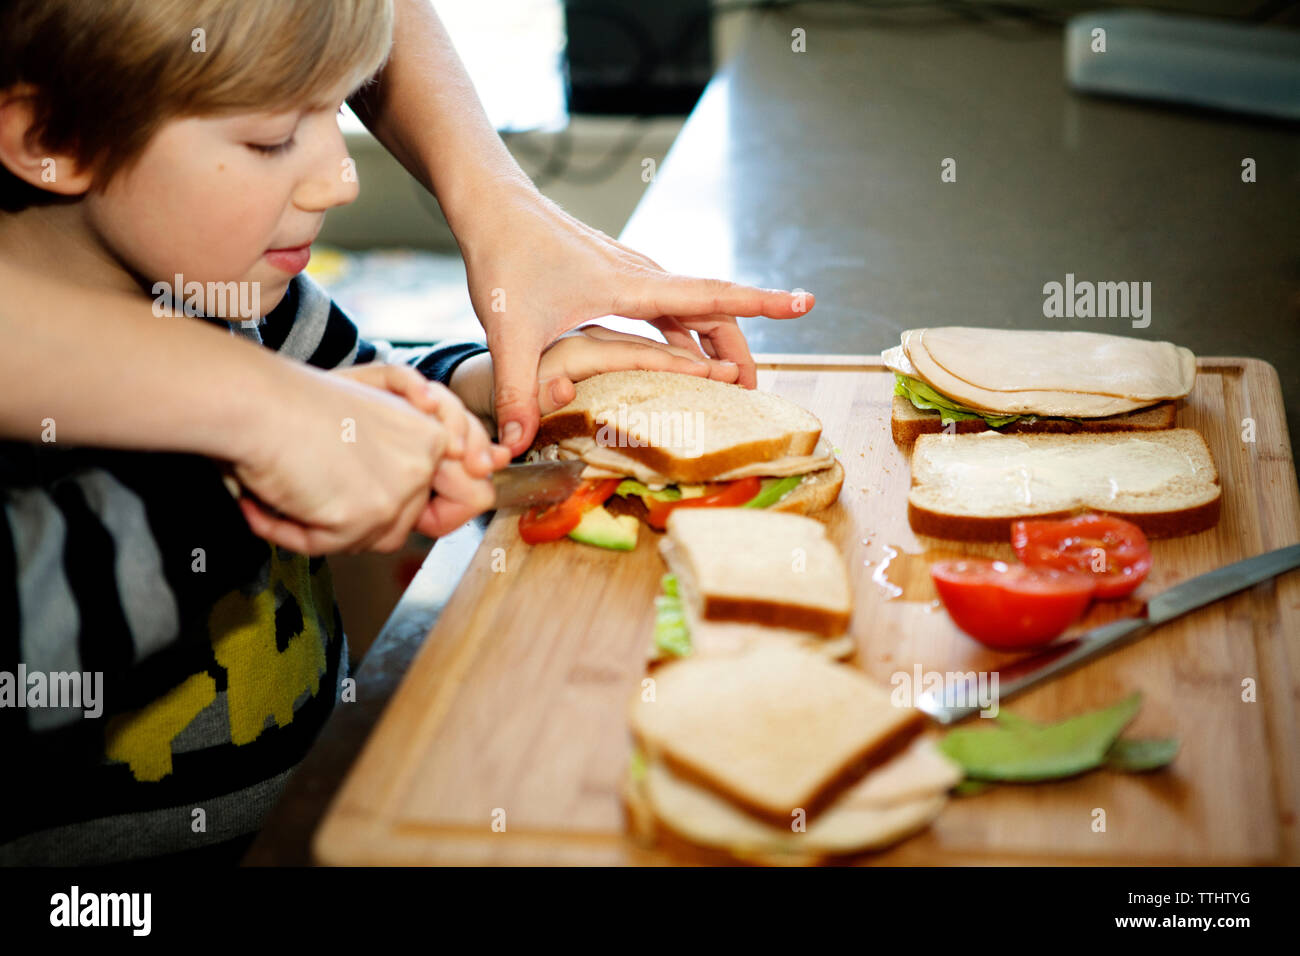 Cropped image of father making sandwich with son in kitchen Stock Photo